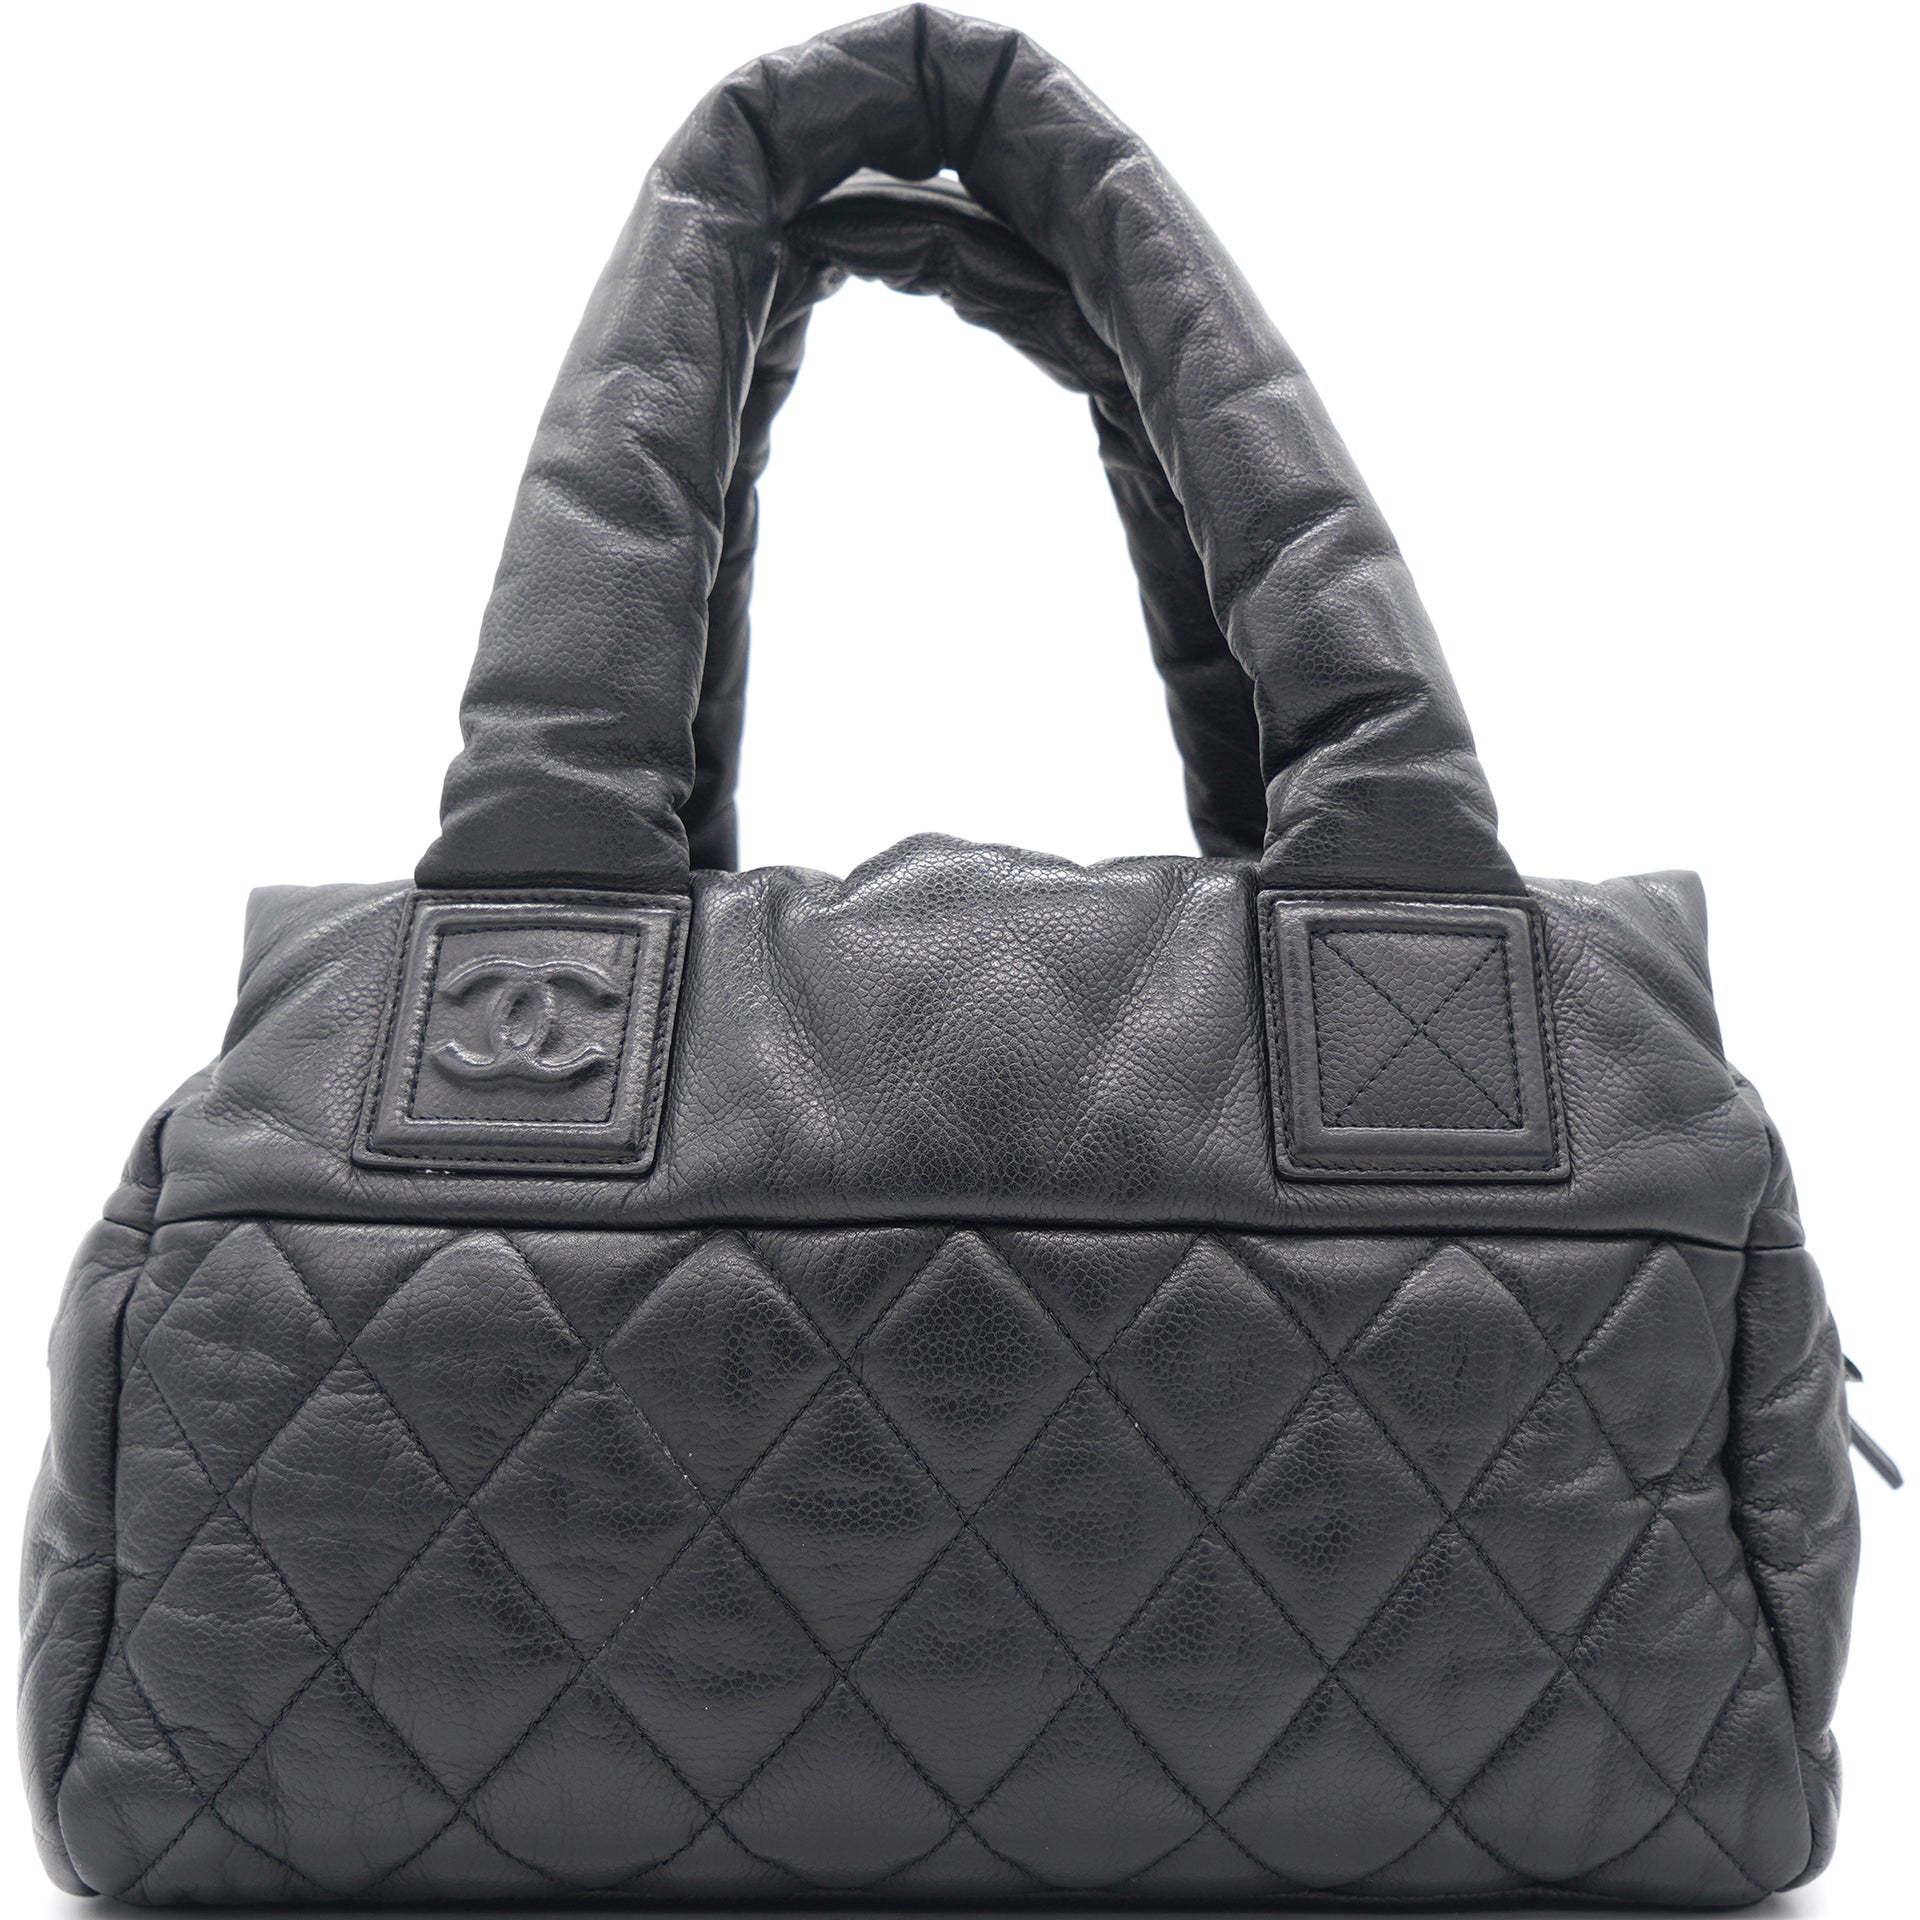 Chanel CHANEL Coco Cocoon PM Tote Bag Nylon / Leather Black Bordeaux 8610  Reversible Mark Quilted Handbag with Guarantee Card 16th